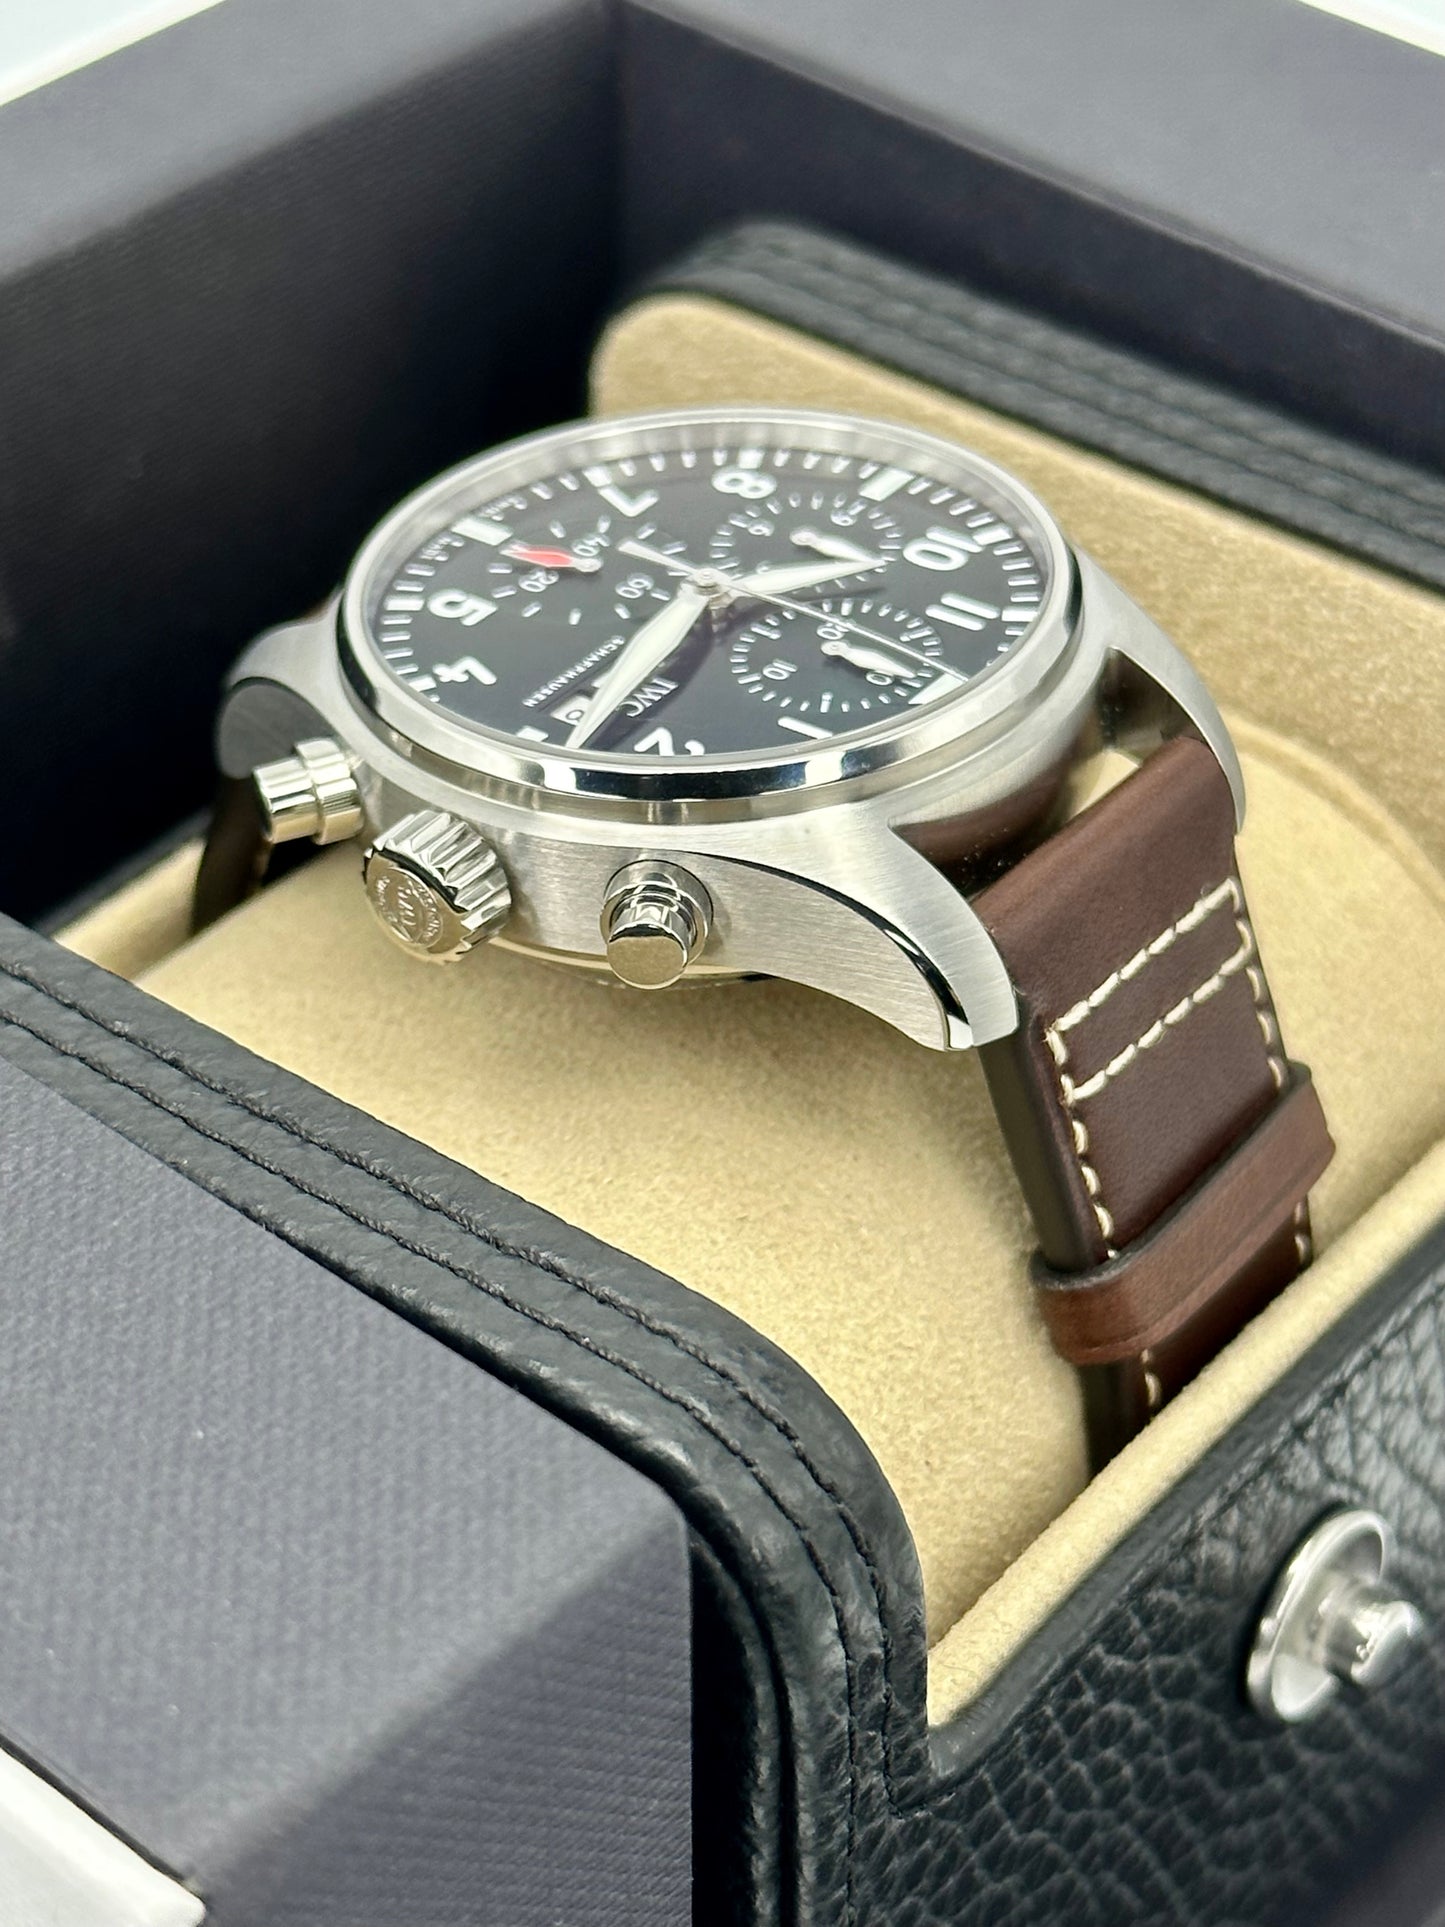 2023 IWC Pilot's Chronograph 41mm IW388103 Stainless Steel Green Dial - MyWatchLLC